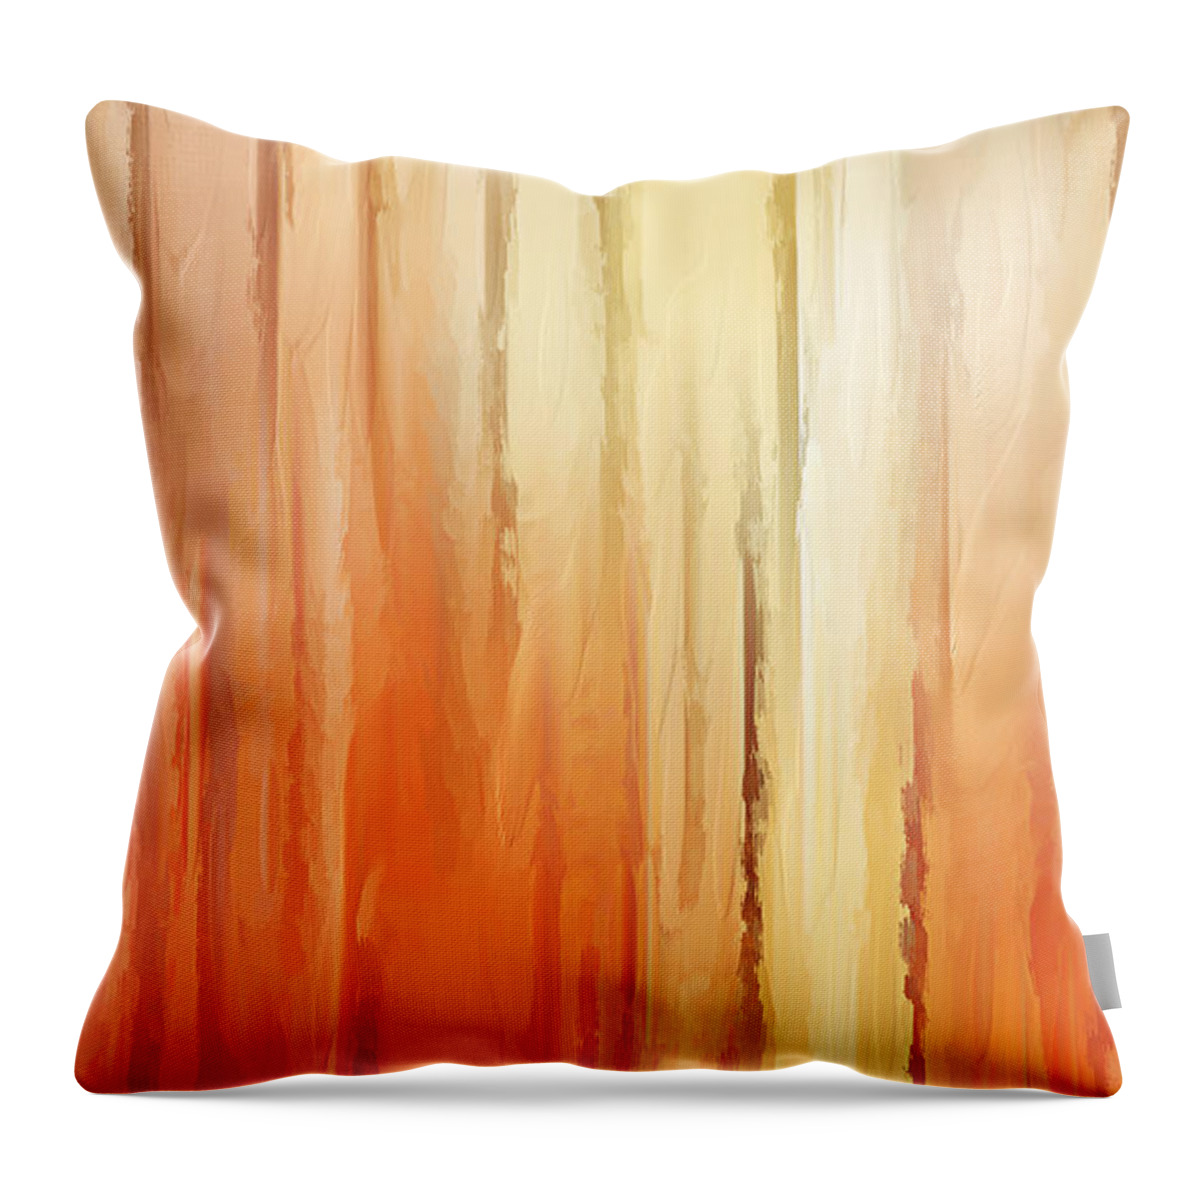 Orange Throw Pillow featuring the painting Elusive View by Lourry Legarde